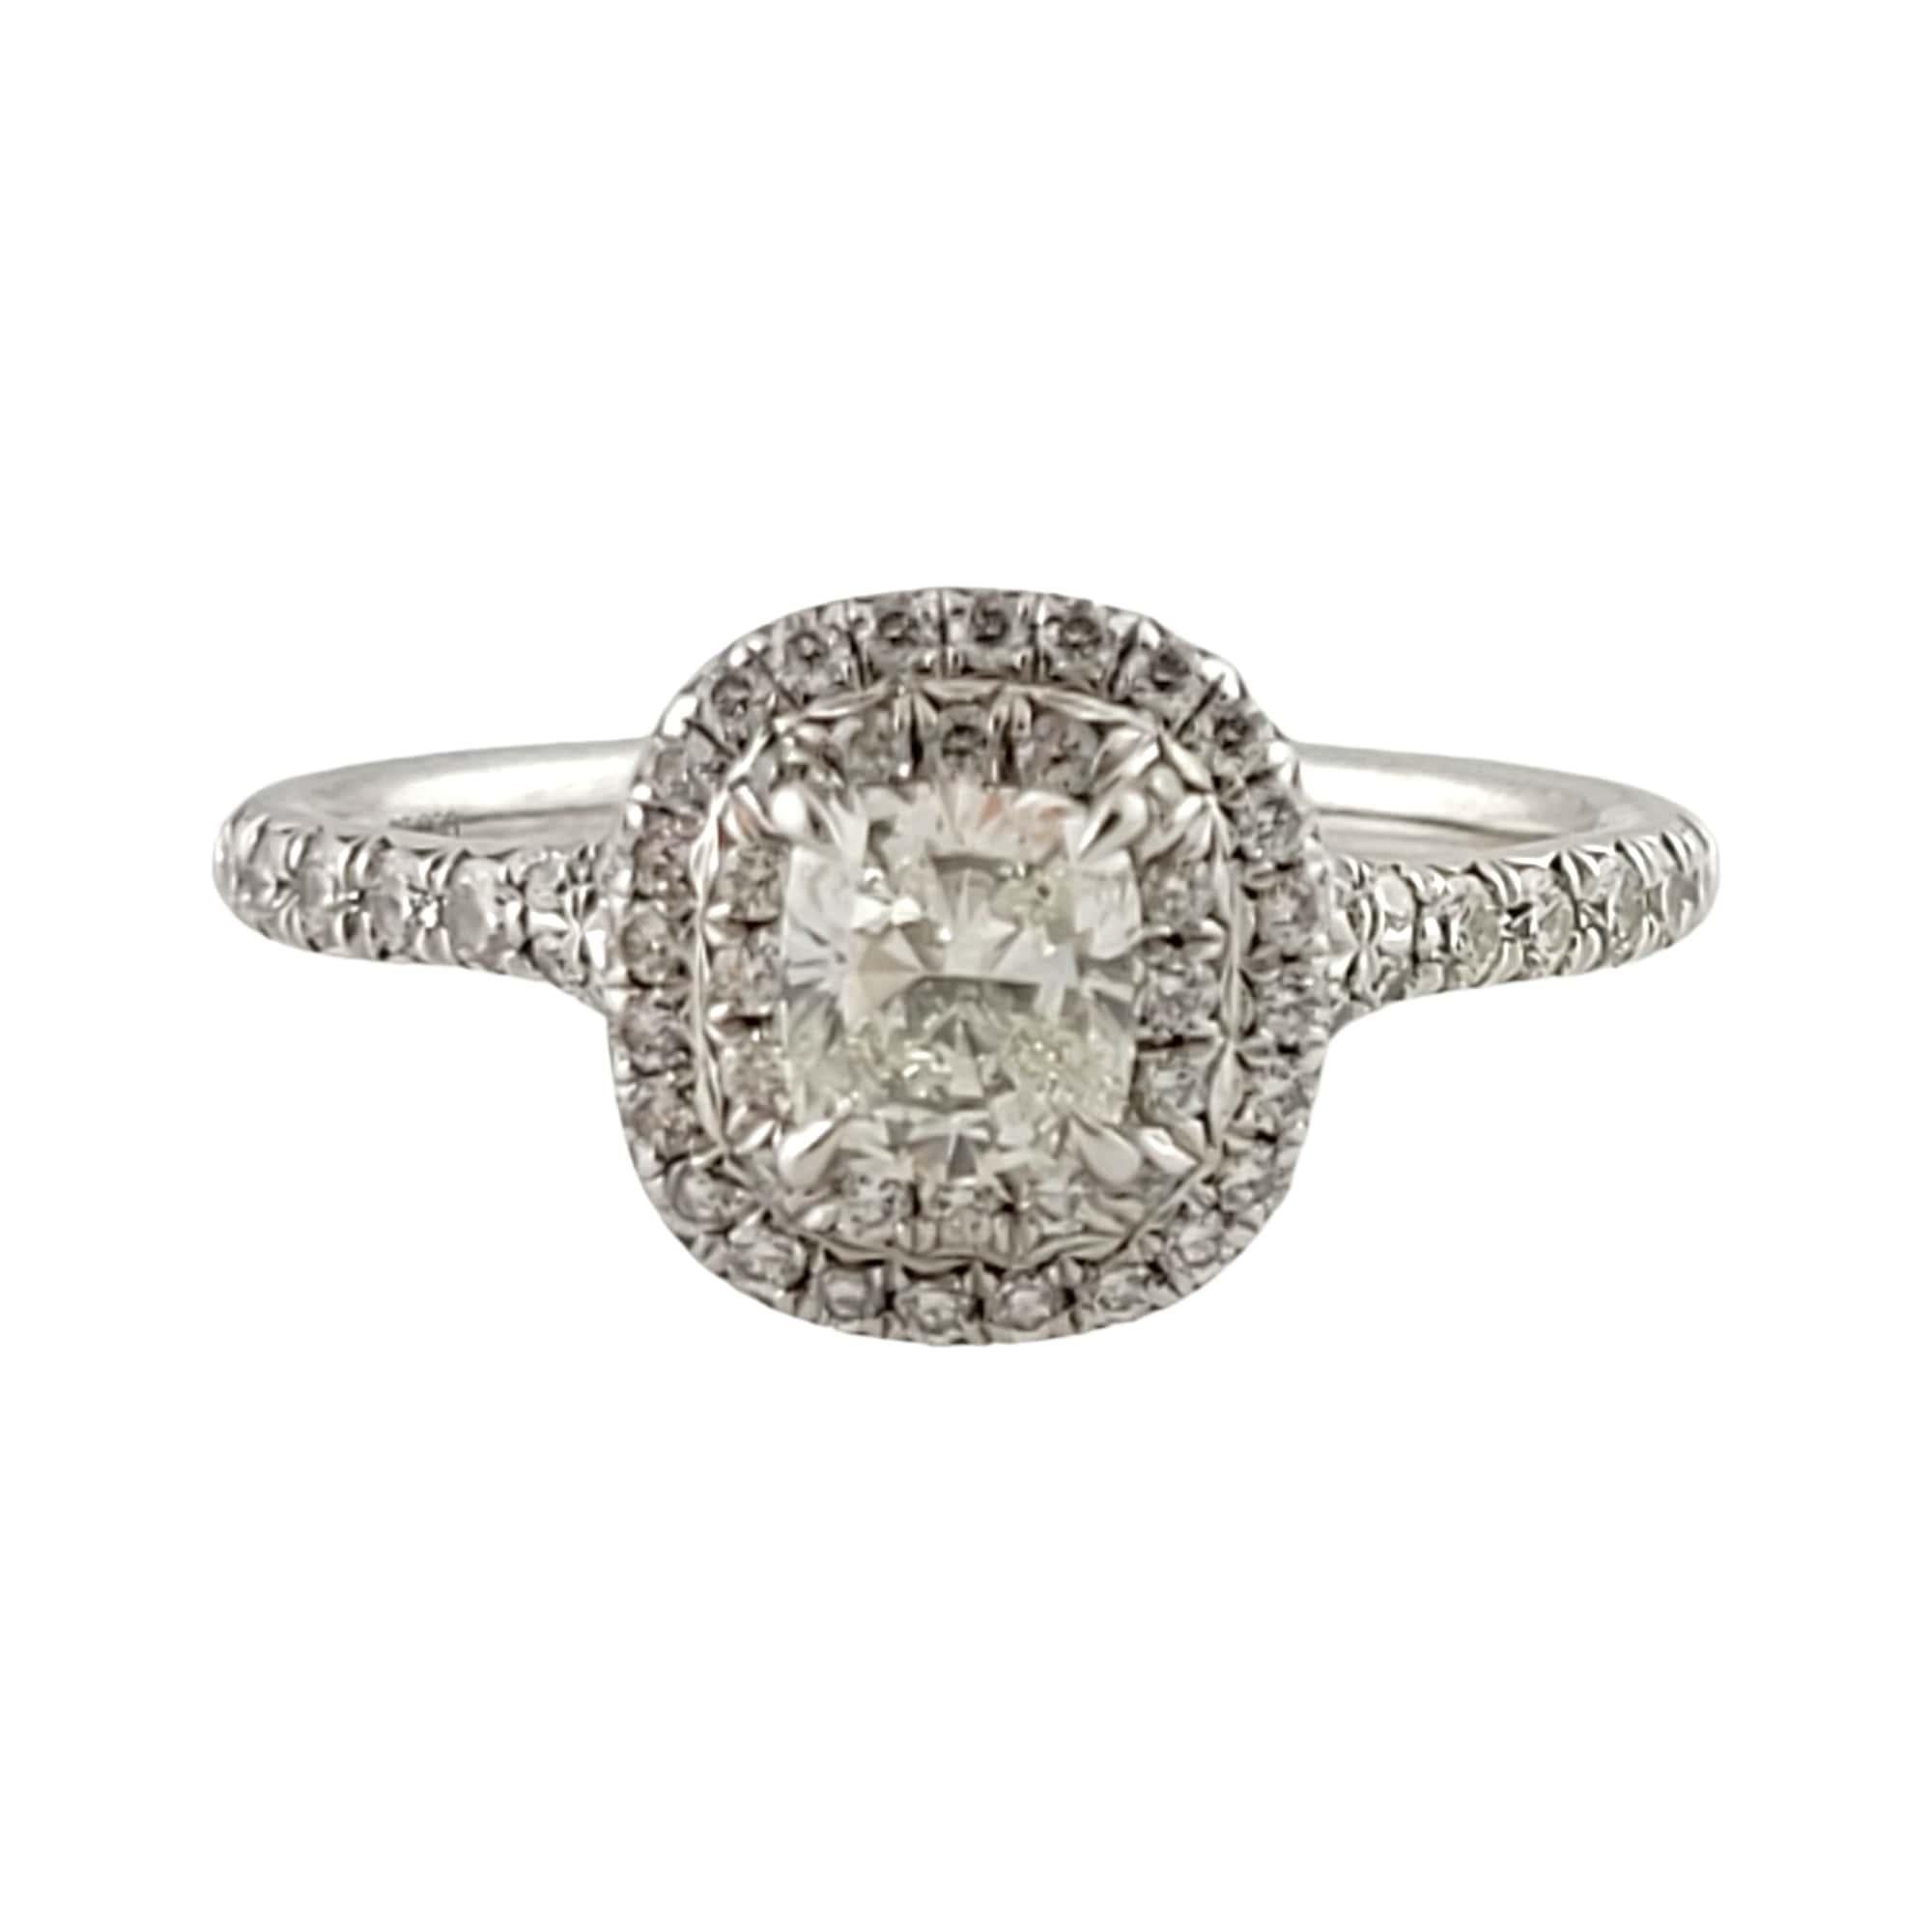 Tiffany & Co Platinum Engagement Ring

This double halo style engagement ring from the Tiffany & Co. Soleste Collection is set in Platinum.

Center diamond is a cushion cut stone. 
Carat weight: .59cts
Clarity: VS2
Color: H
Crown Inscription: T &